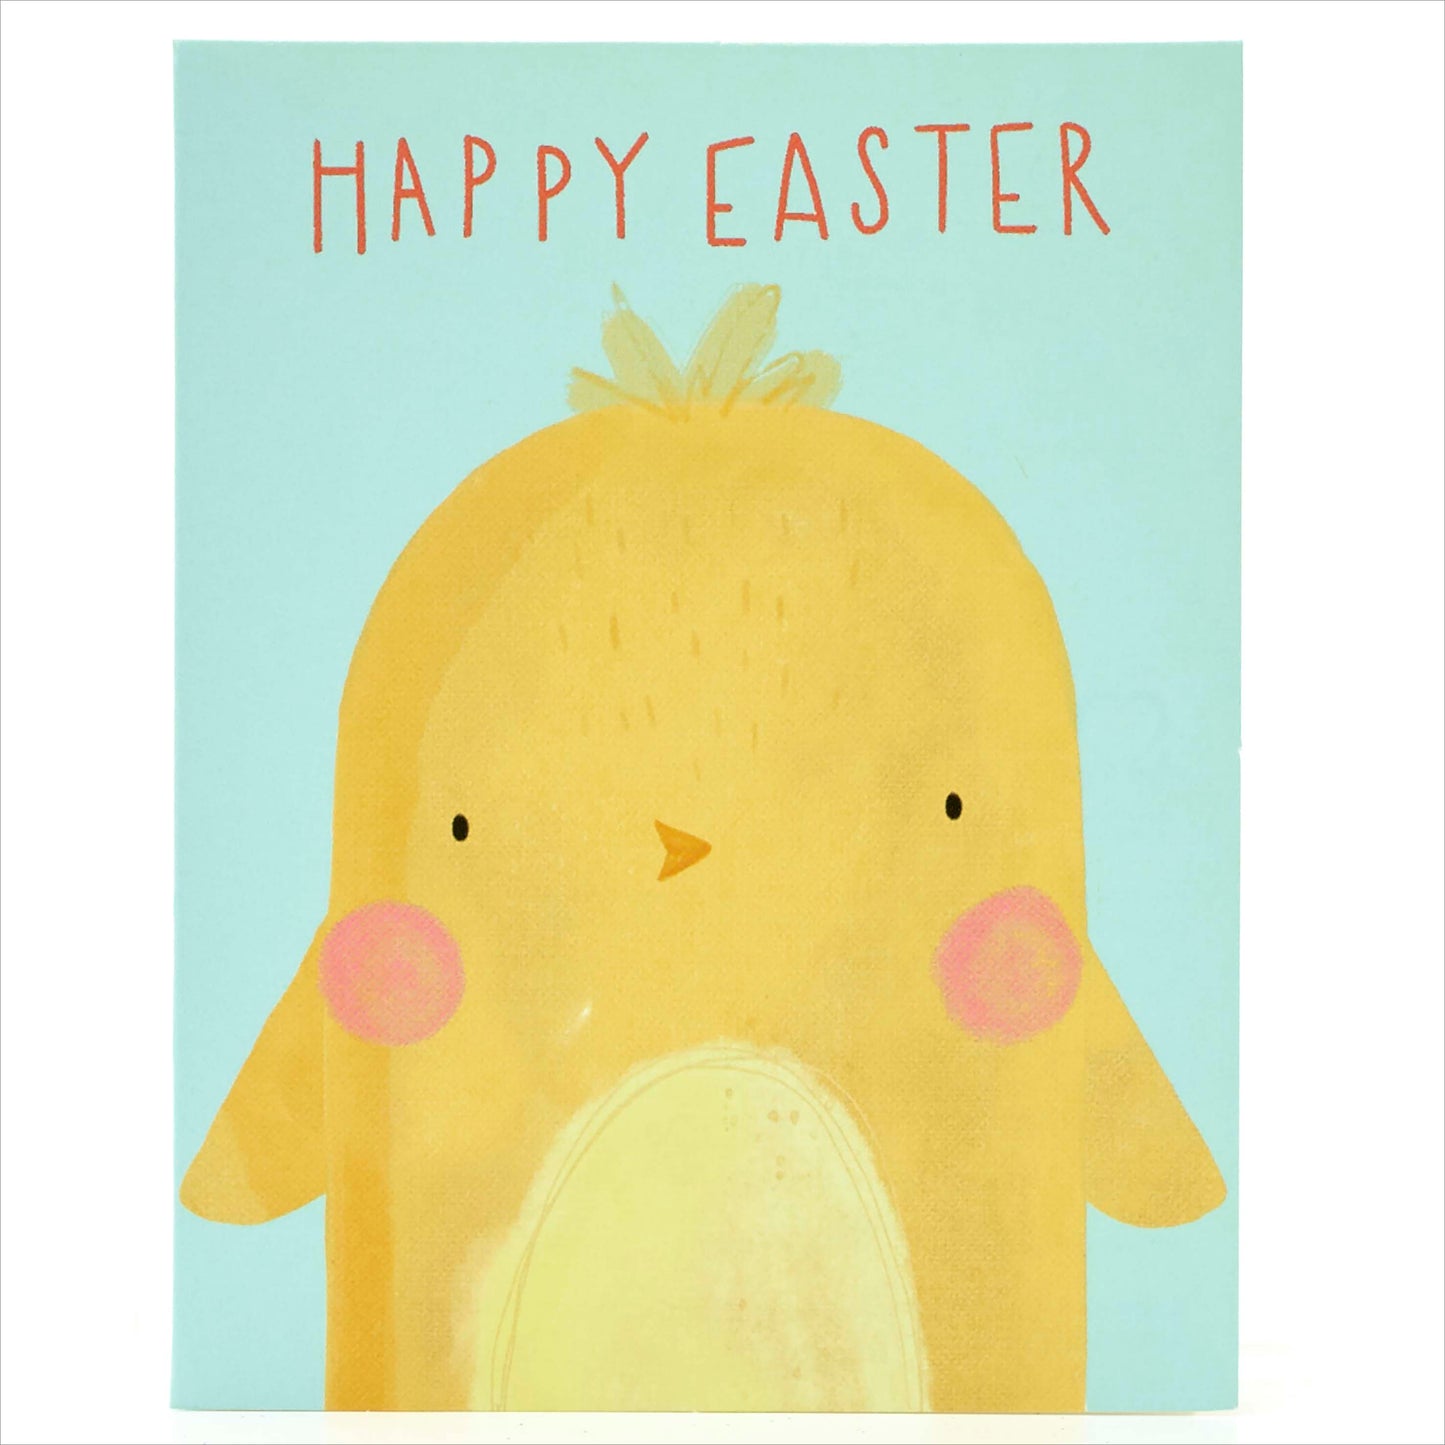 Pack of 6 British Heart Foundation Charity Easter Greeting Cards